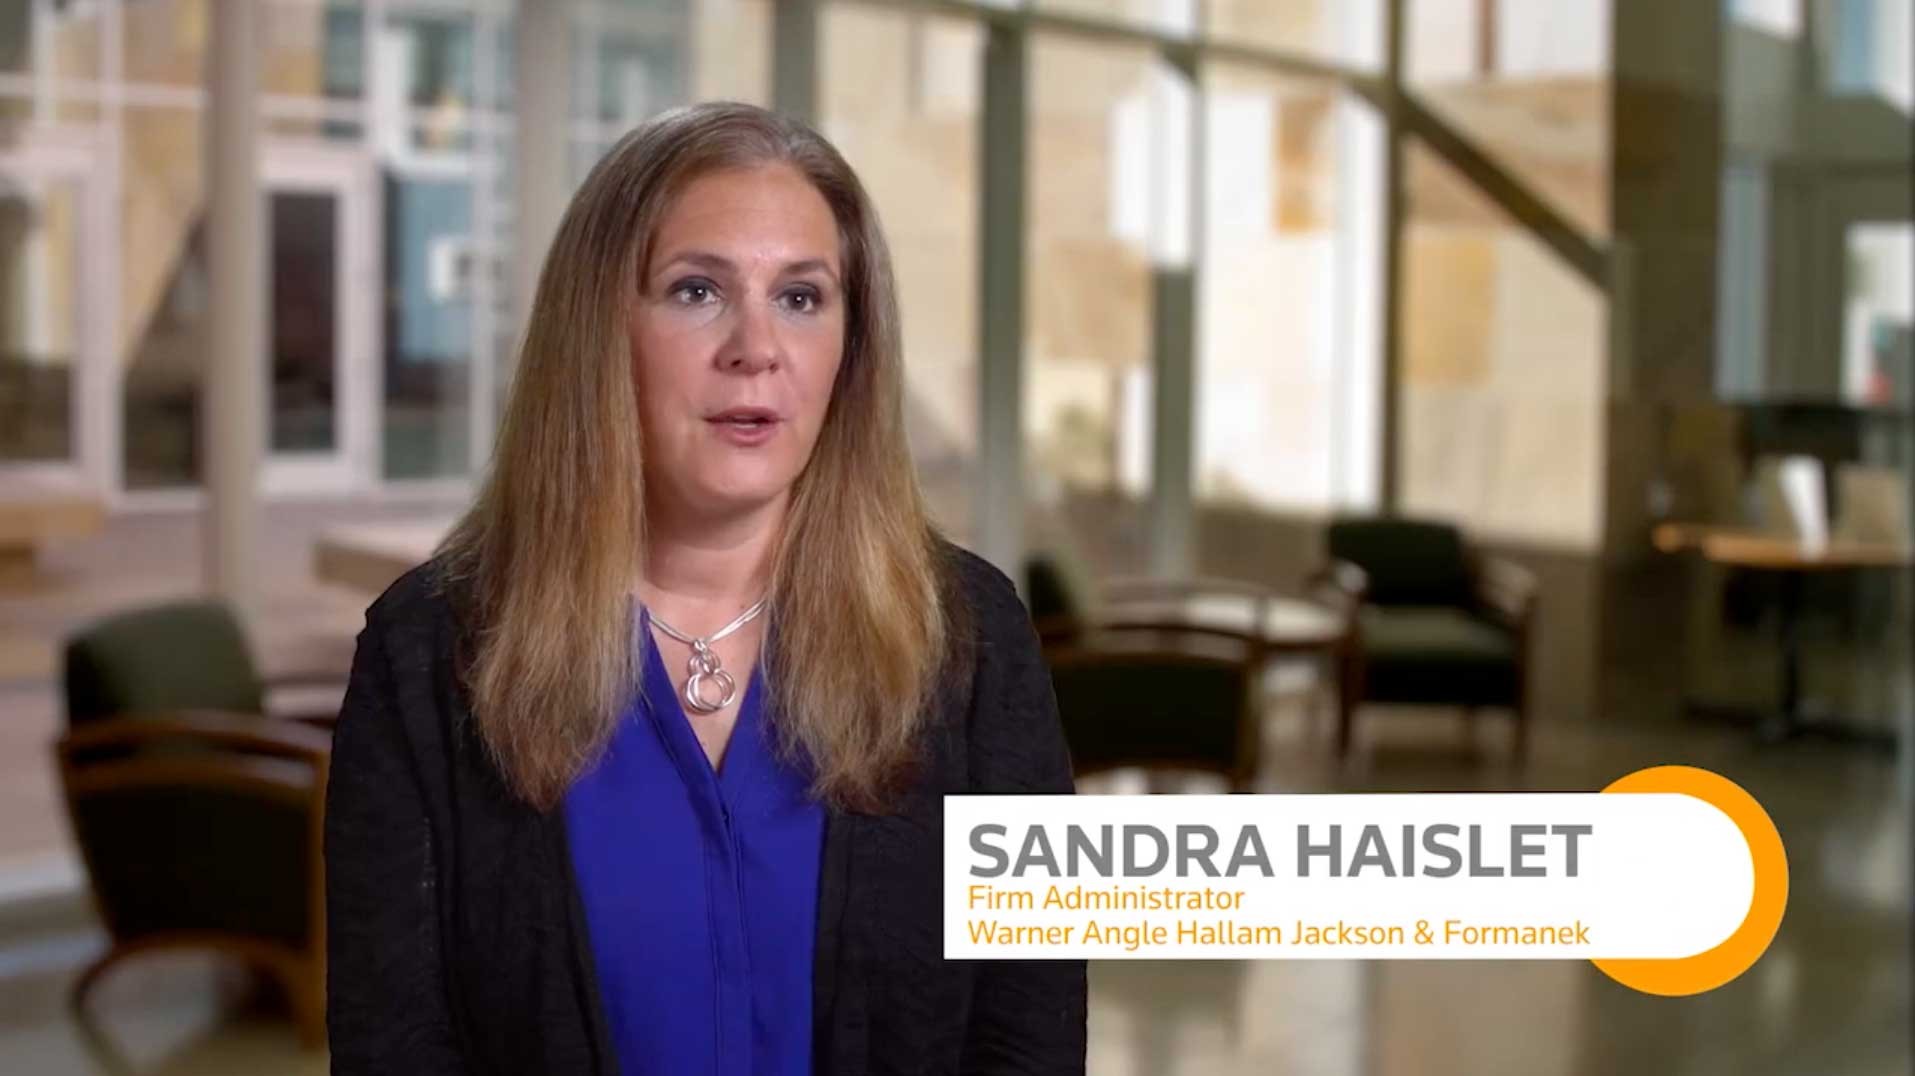 Sandra Haislet talks about how her firm uses ProLaw